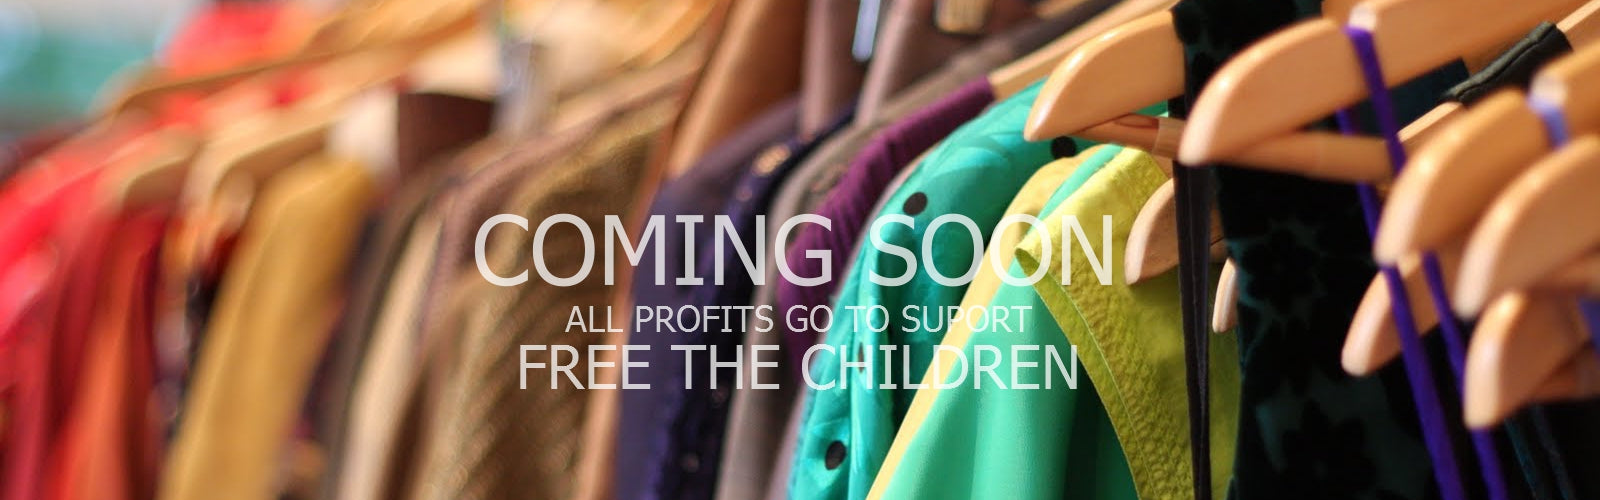 Coming soon Free the children